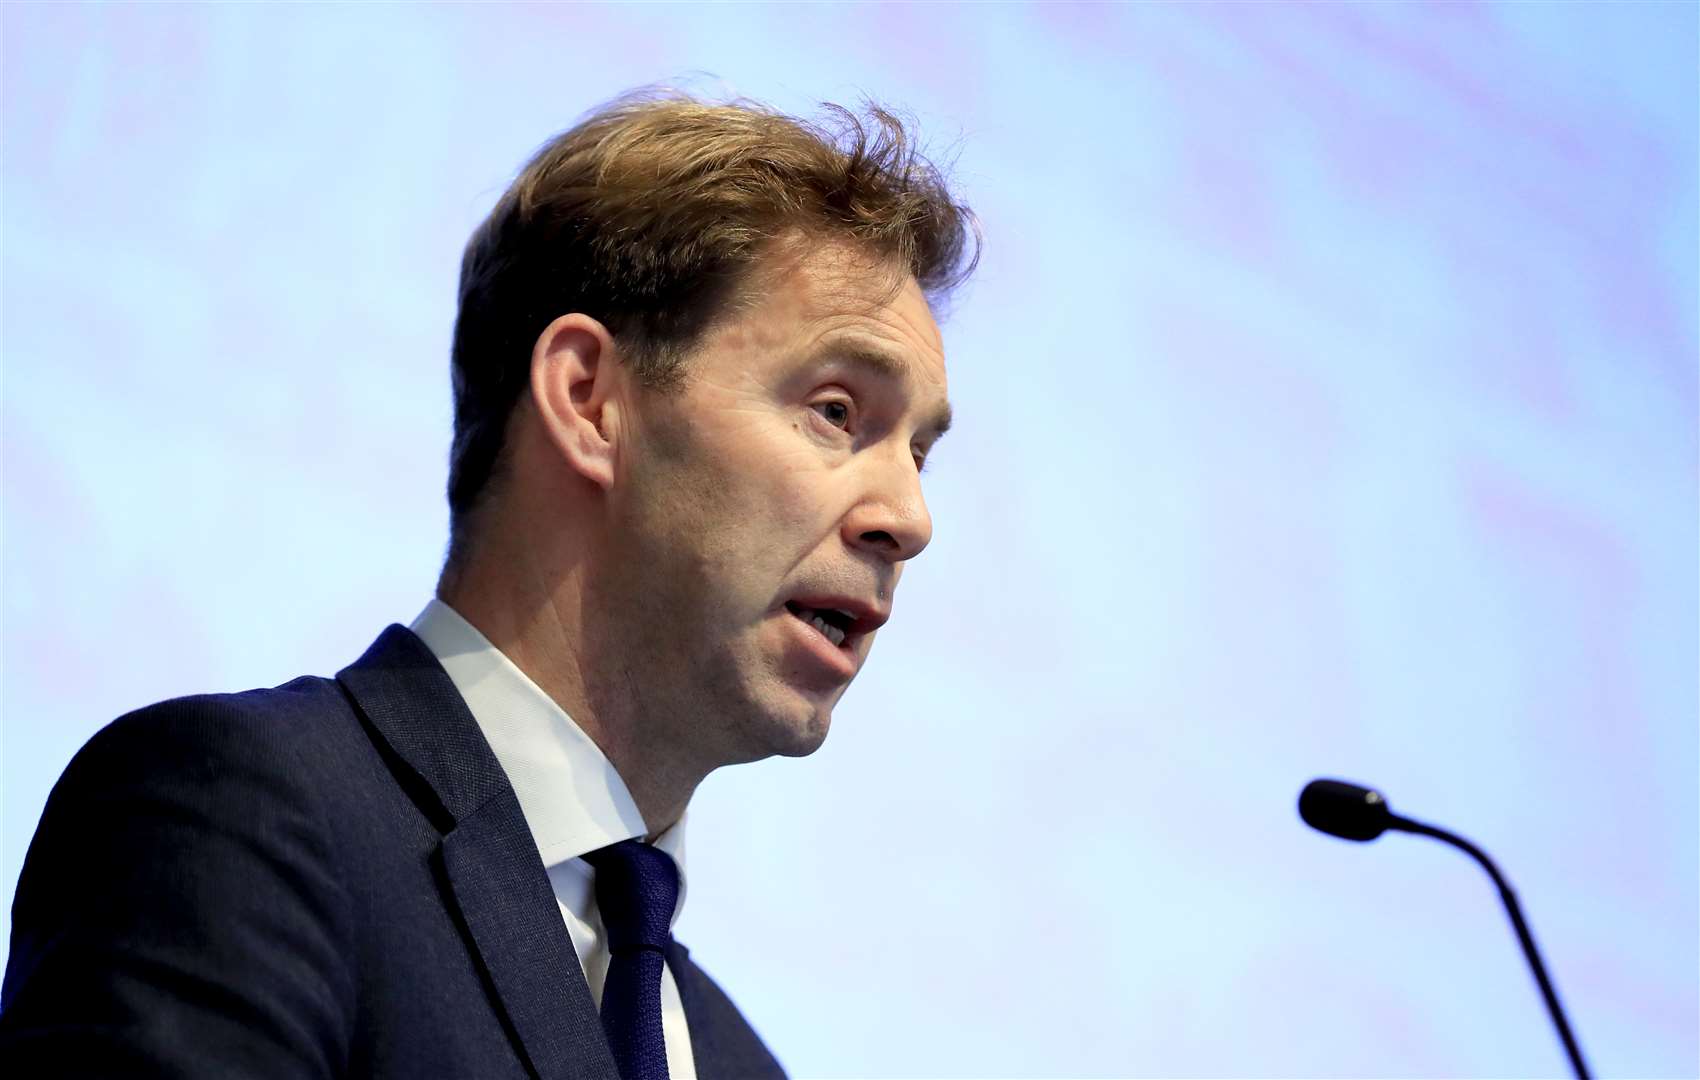 Defence committee chairman Tobias Ellwood is set to make a speech marking the two-year anniversary of the Taliban’s return (Gareth Fuller/PA)